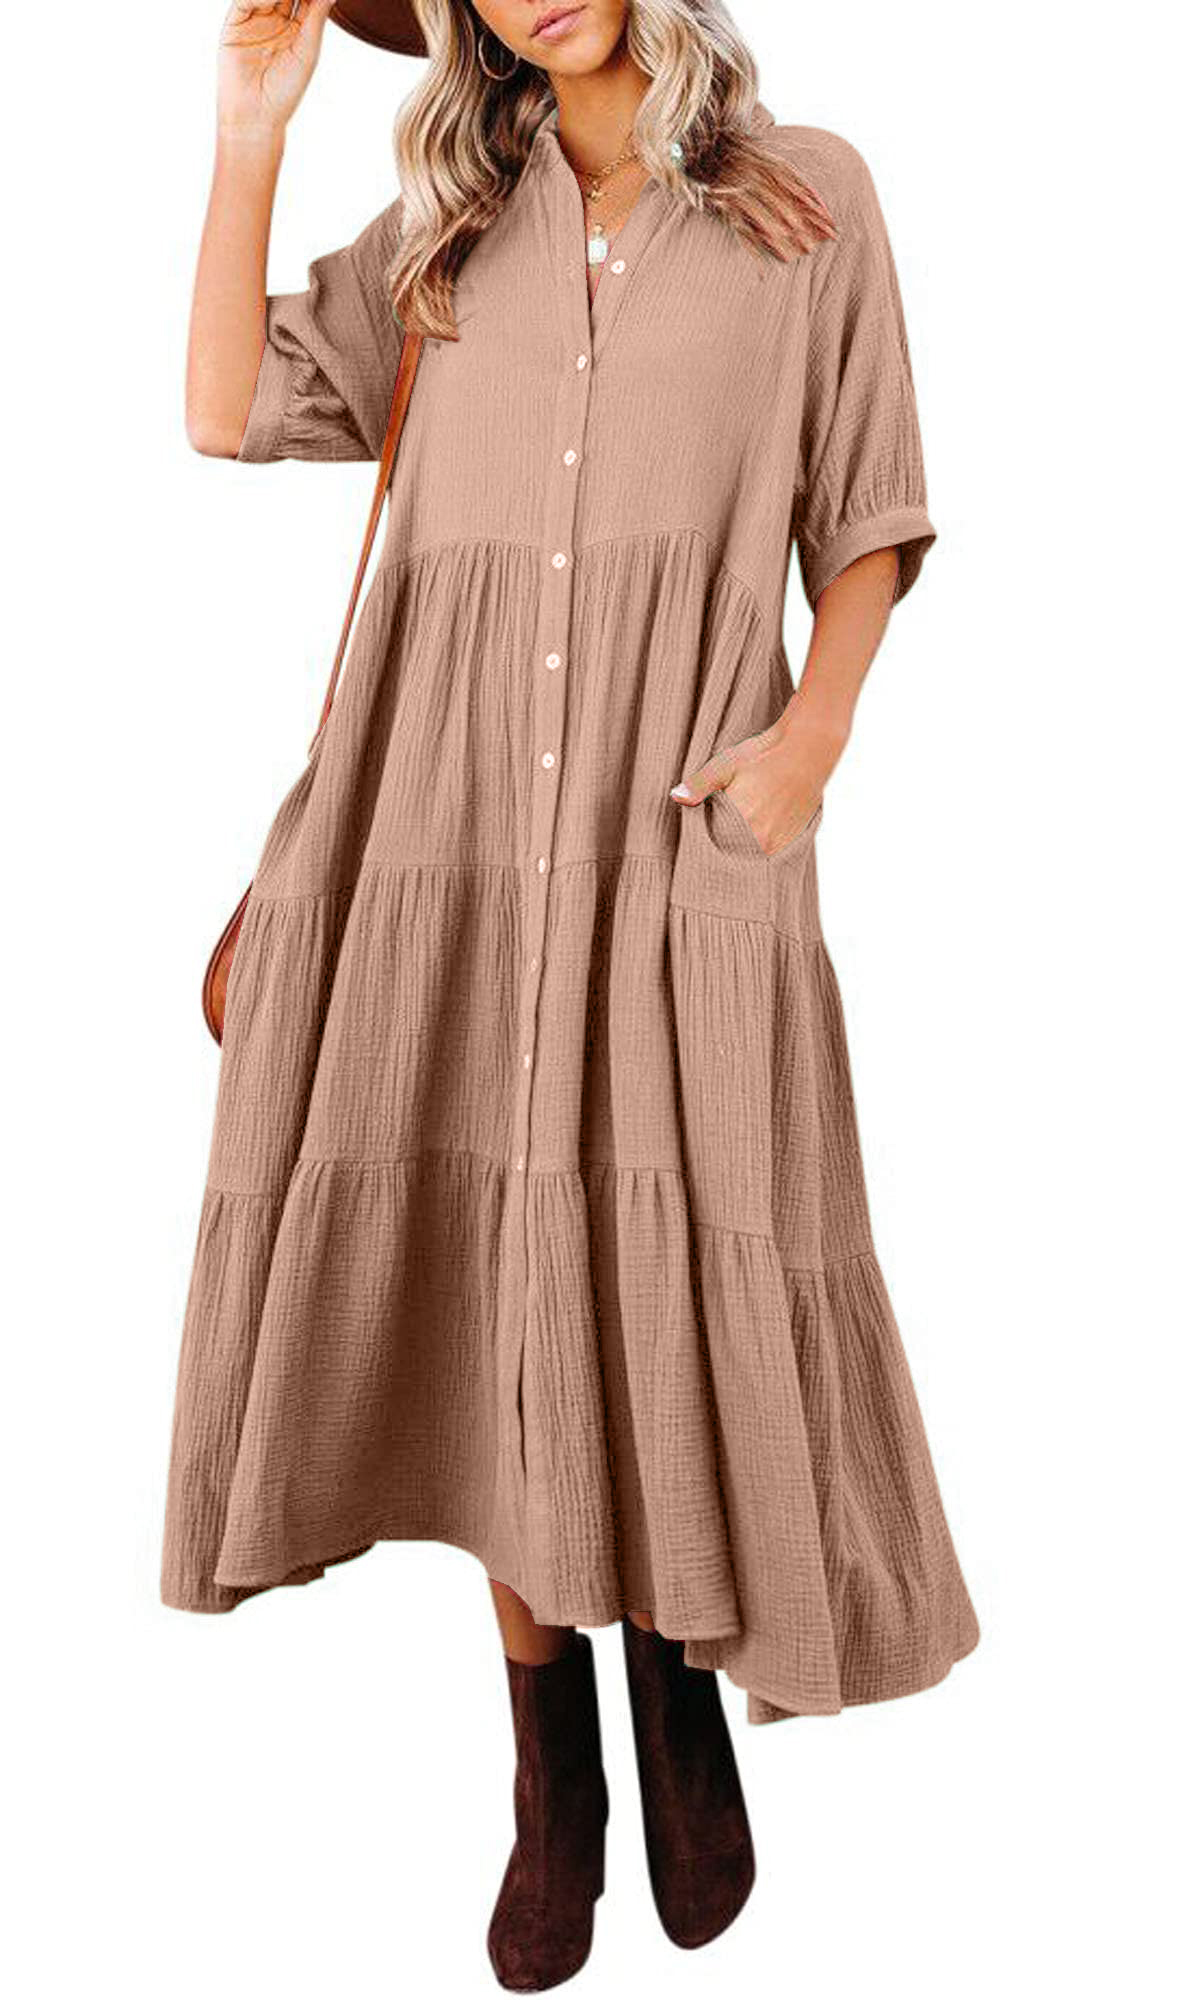 Women's Button Down Tiered Ruffle Flowy Midi Dress with Pockets (Buy 2 Free Shipping)